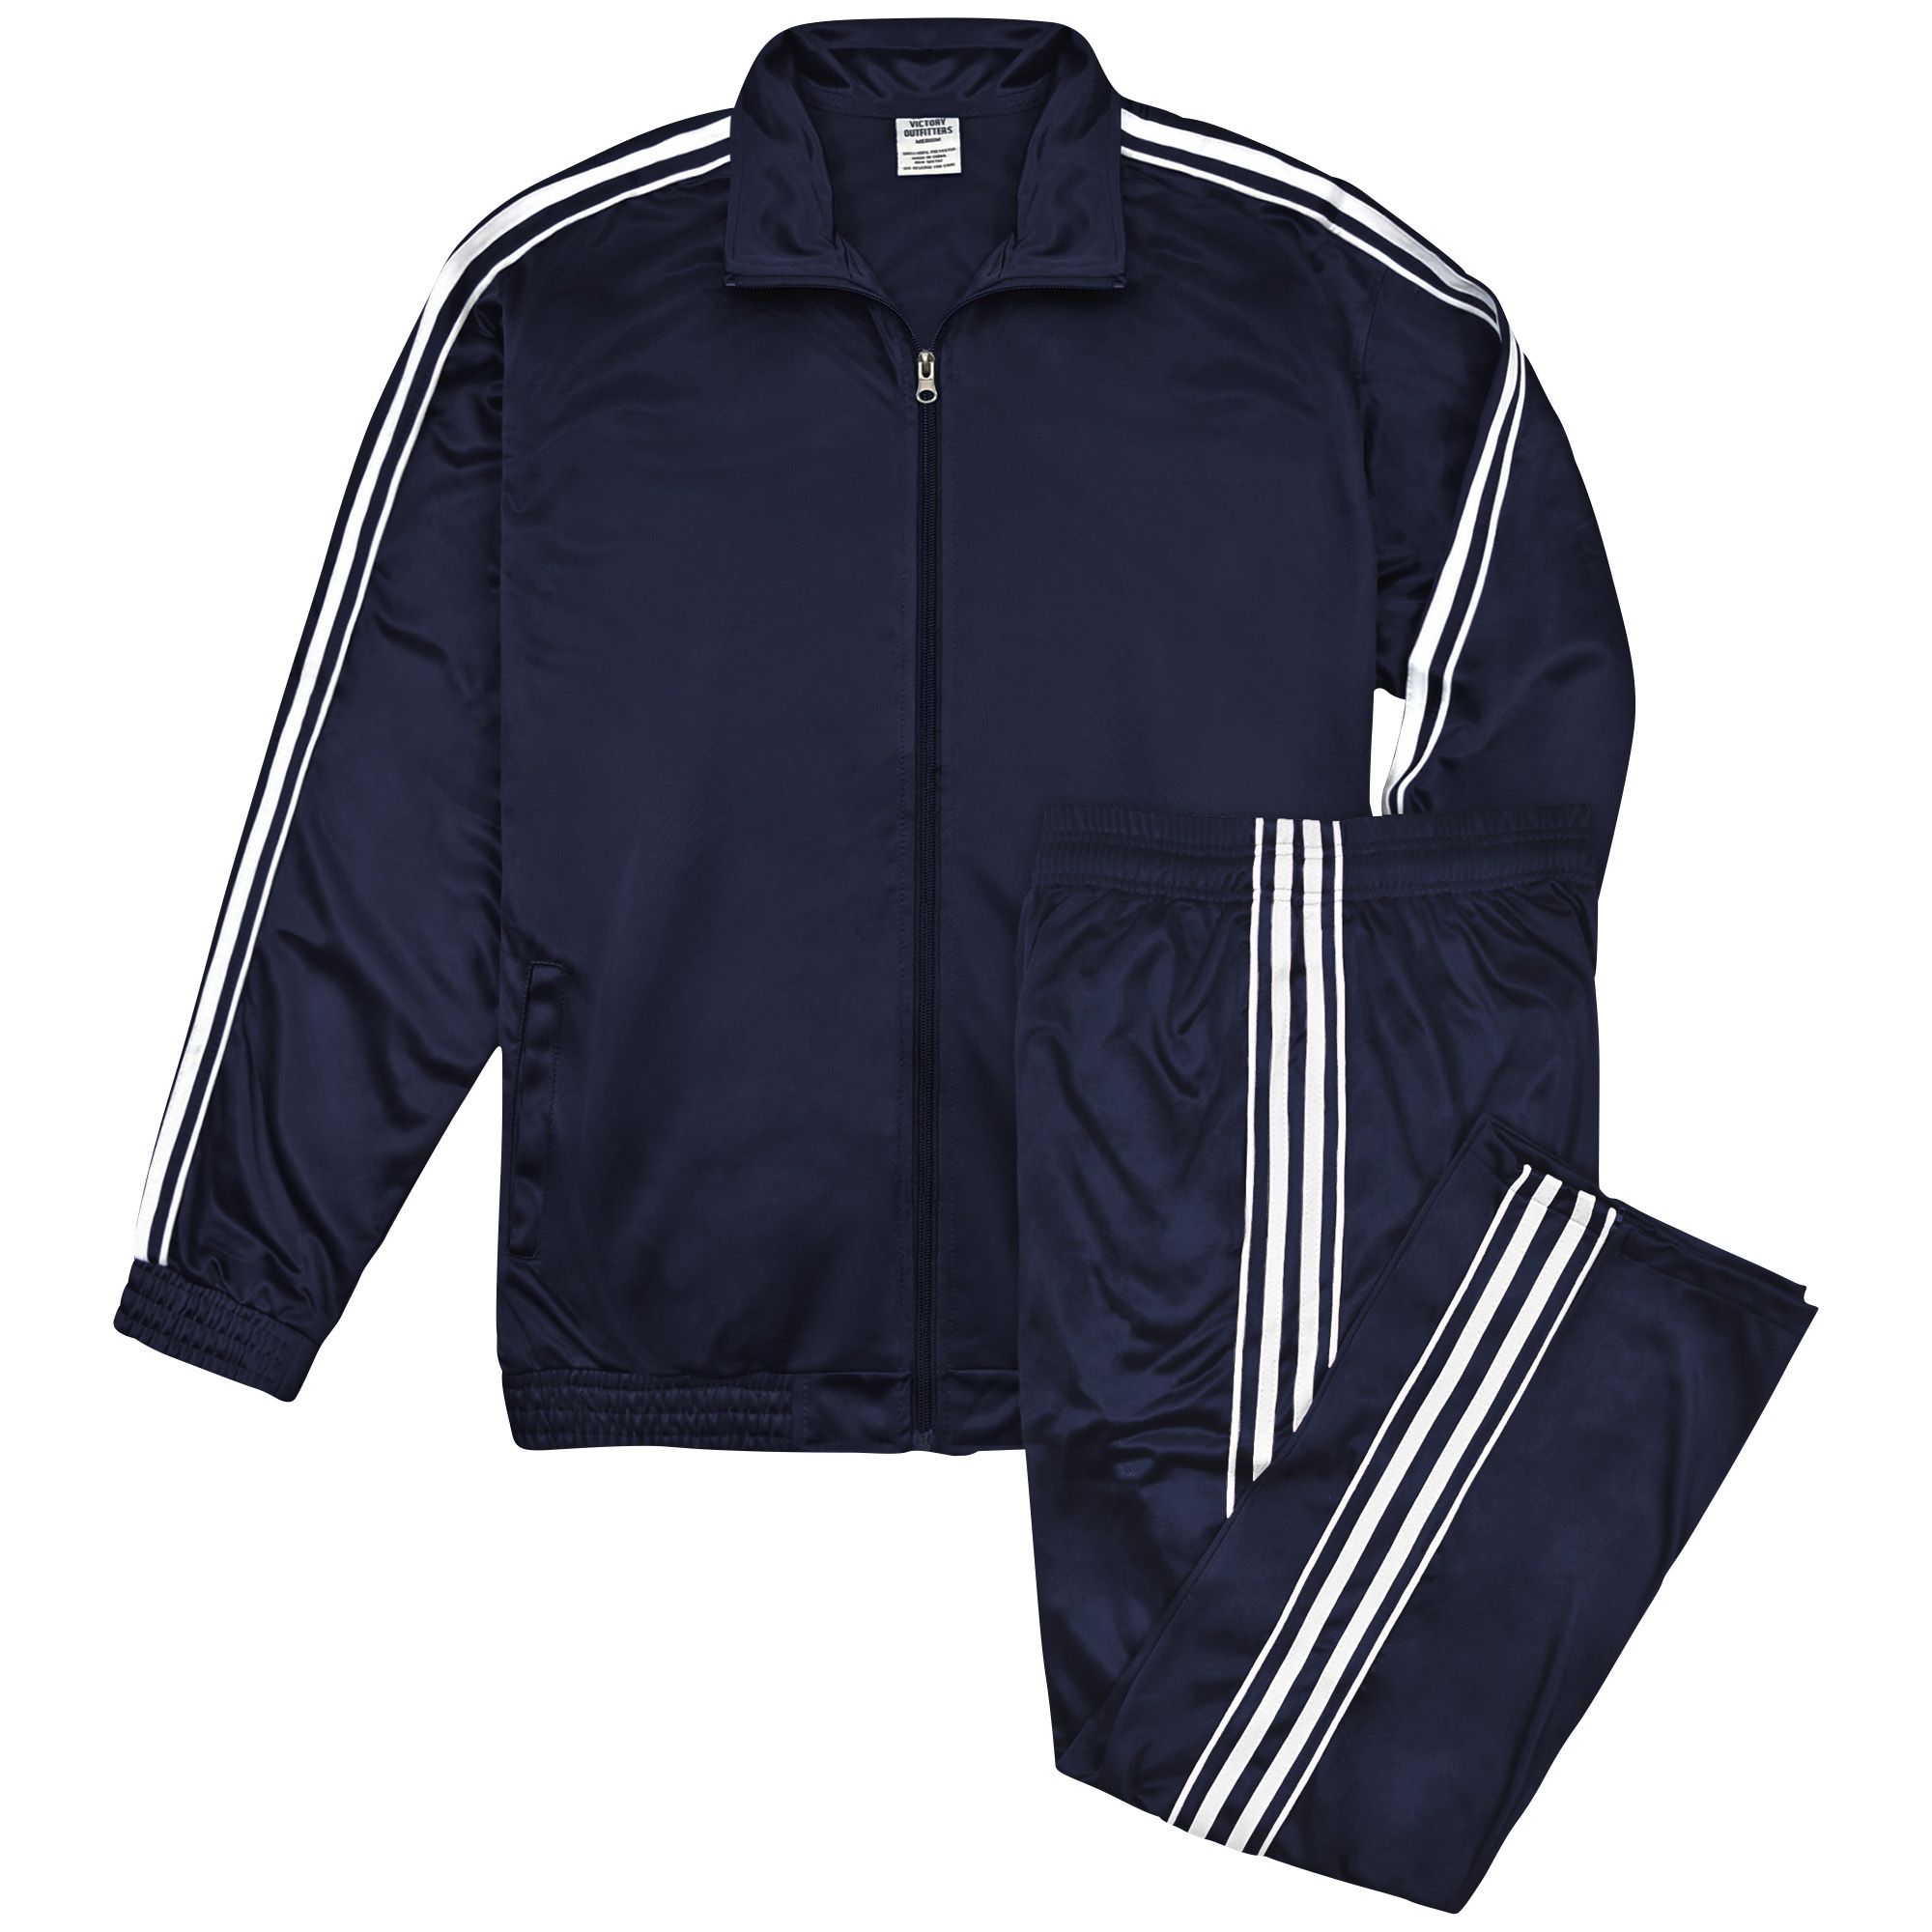 Diego Track Jacket - Sweatsuits & Tracksuits